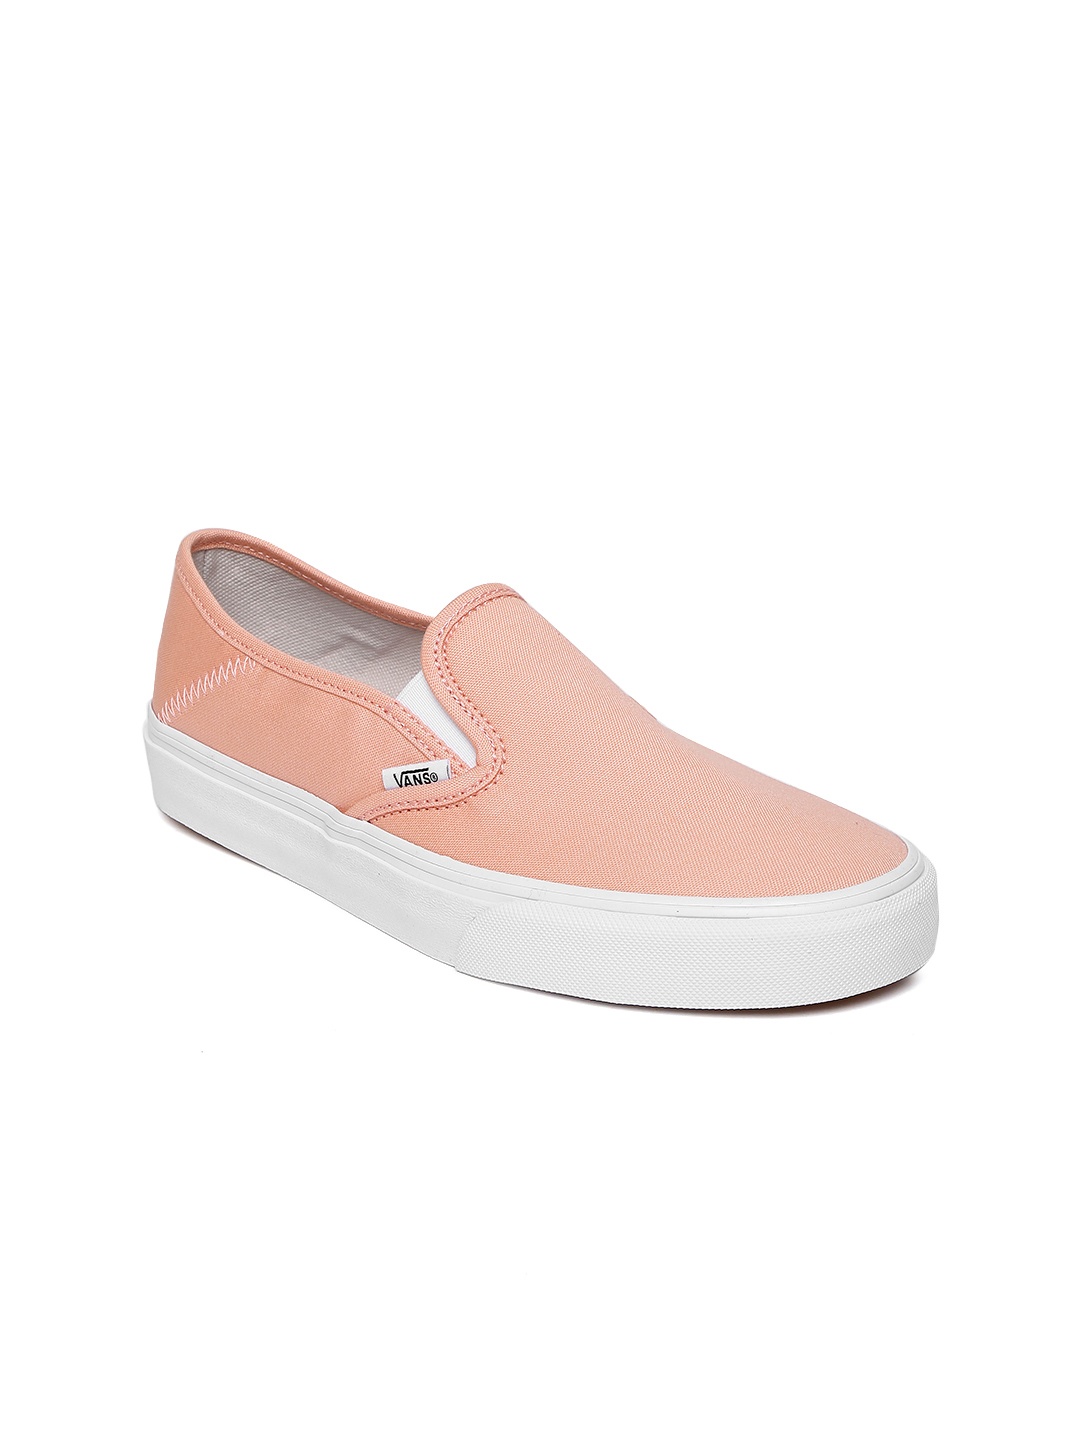 Vans Women Peach-Coloured Slip-On Sneakers price Myntra. Loafers Deals ...